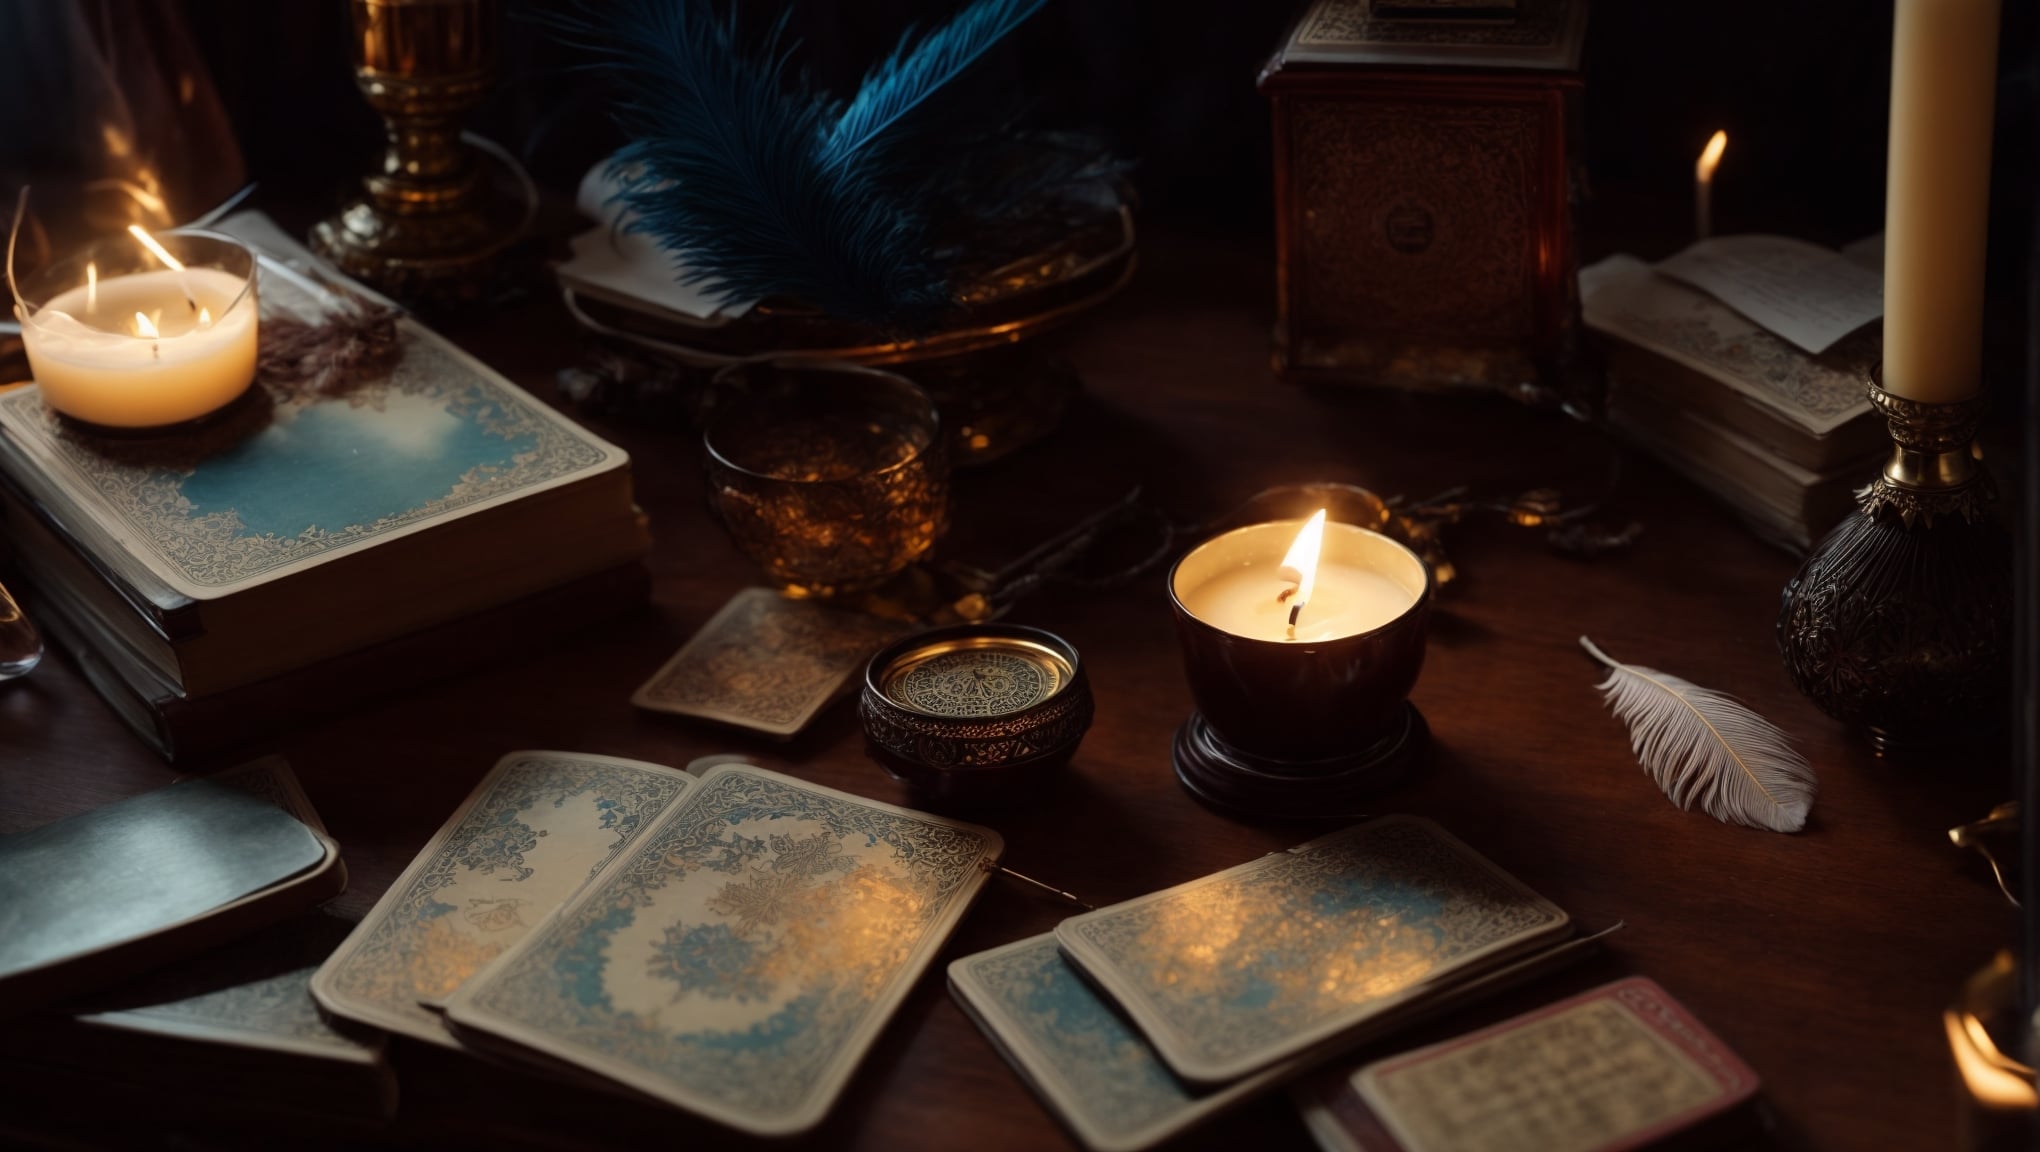 An old-fashioned desk filled with tarot cards, a lit candle, crystal ball, and books to learn tarot card symbol interpretation, alongside a feather quill and inkwell under a gentle, mysterious glow.